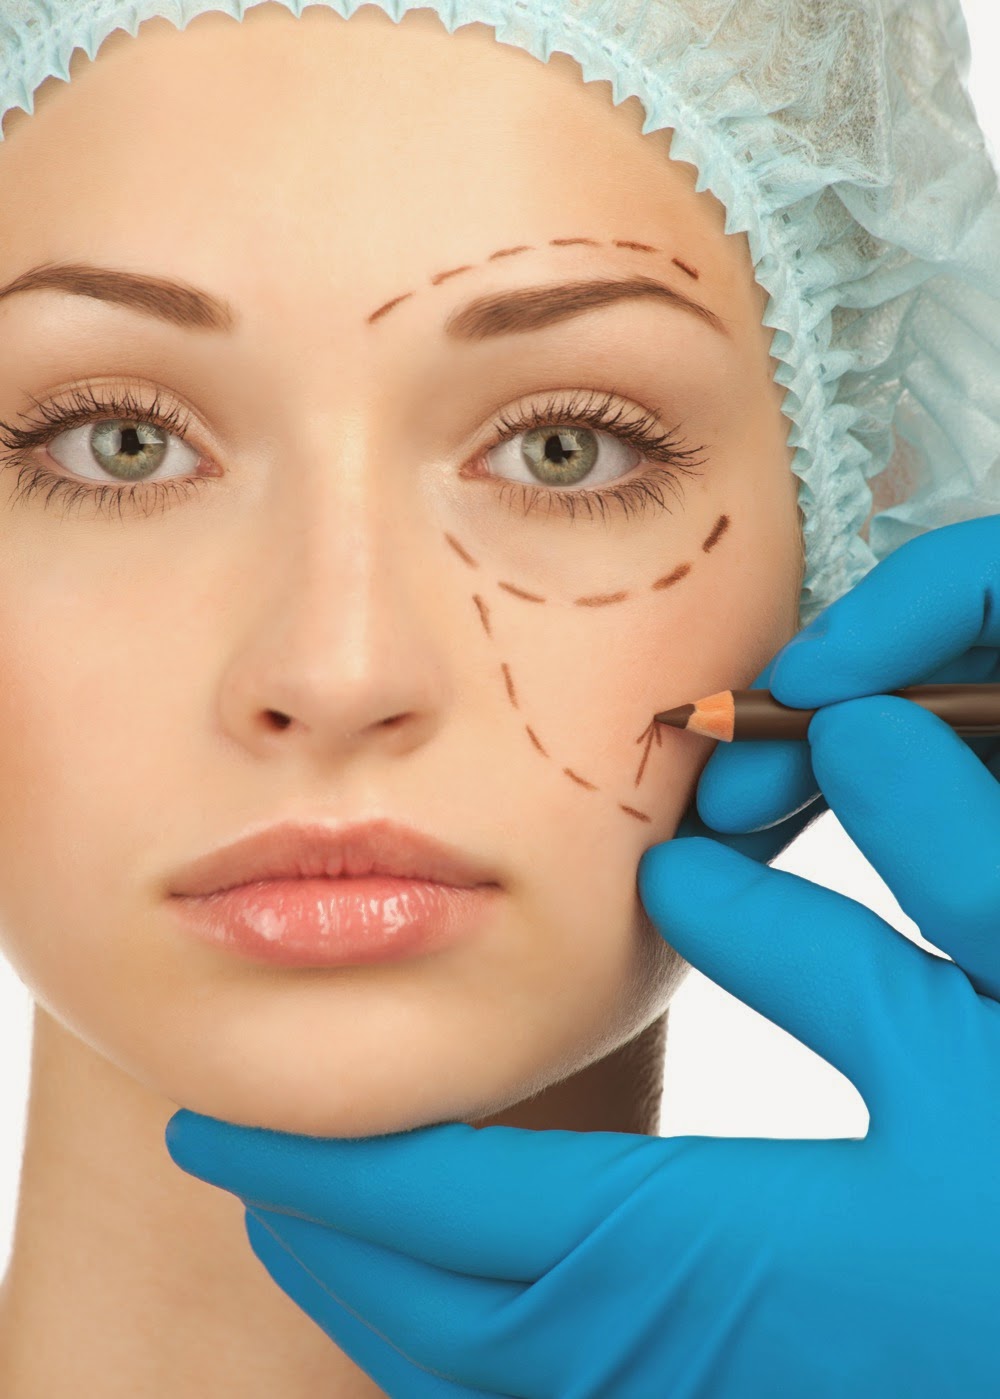 The Often Unexpected Benefits Of Cosmetic Surgery